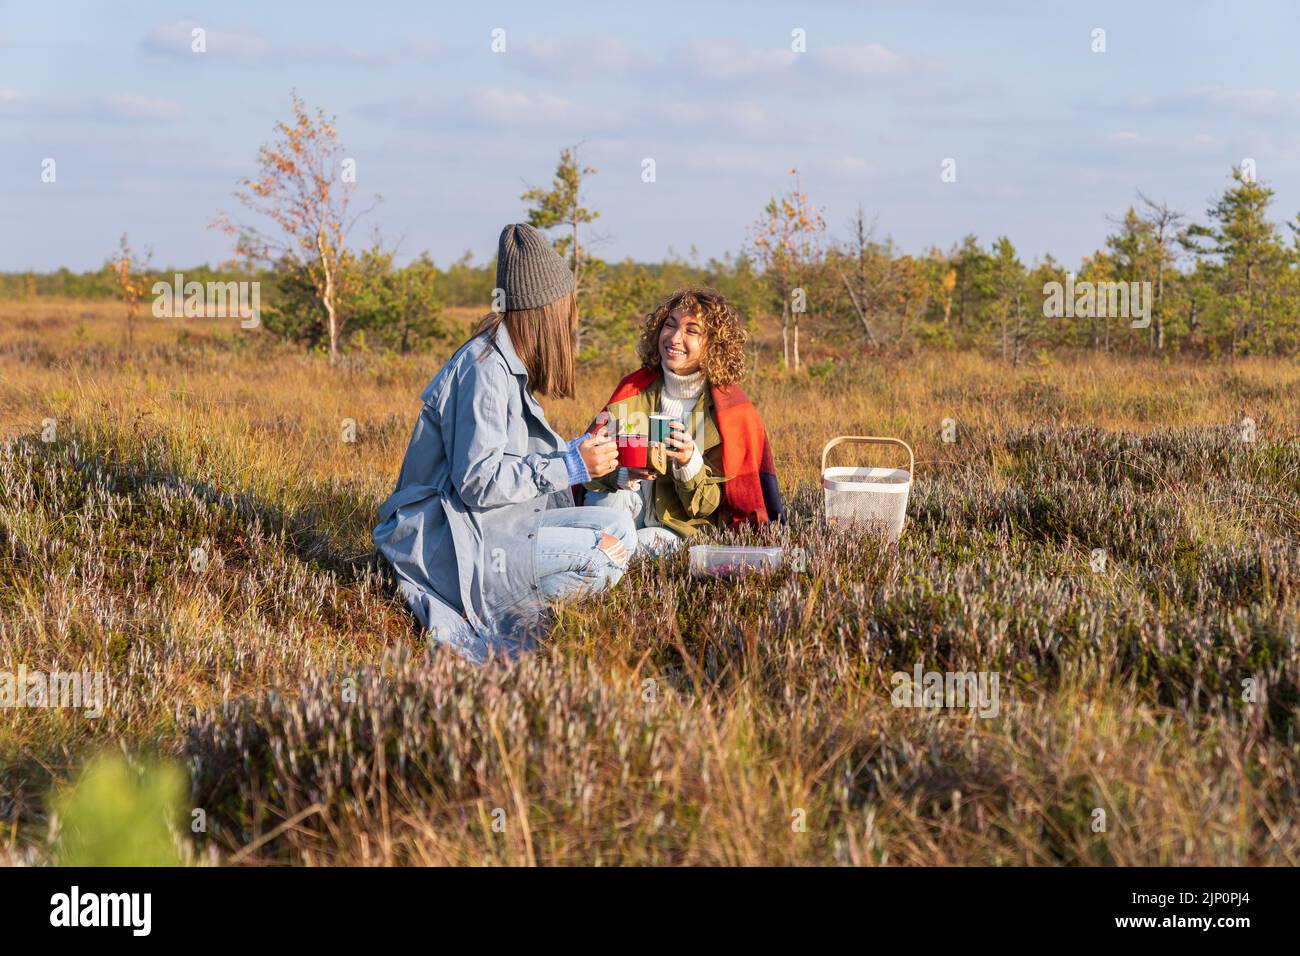 Smiling adult sisters make picnic on grass meadow after gathering berries against trees Stock Photo